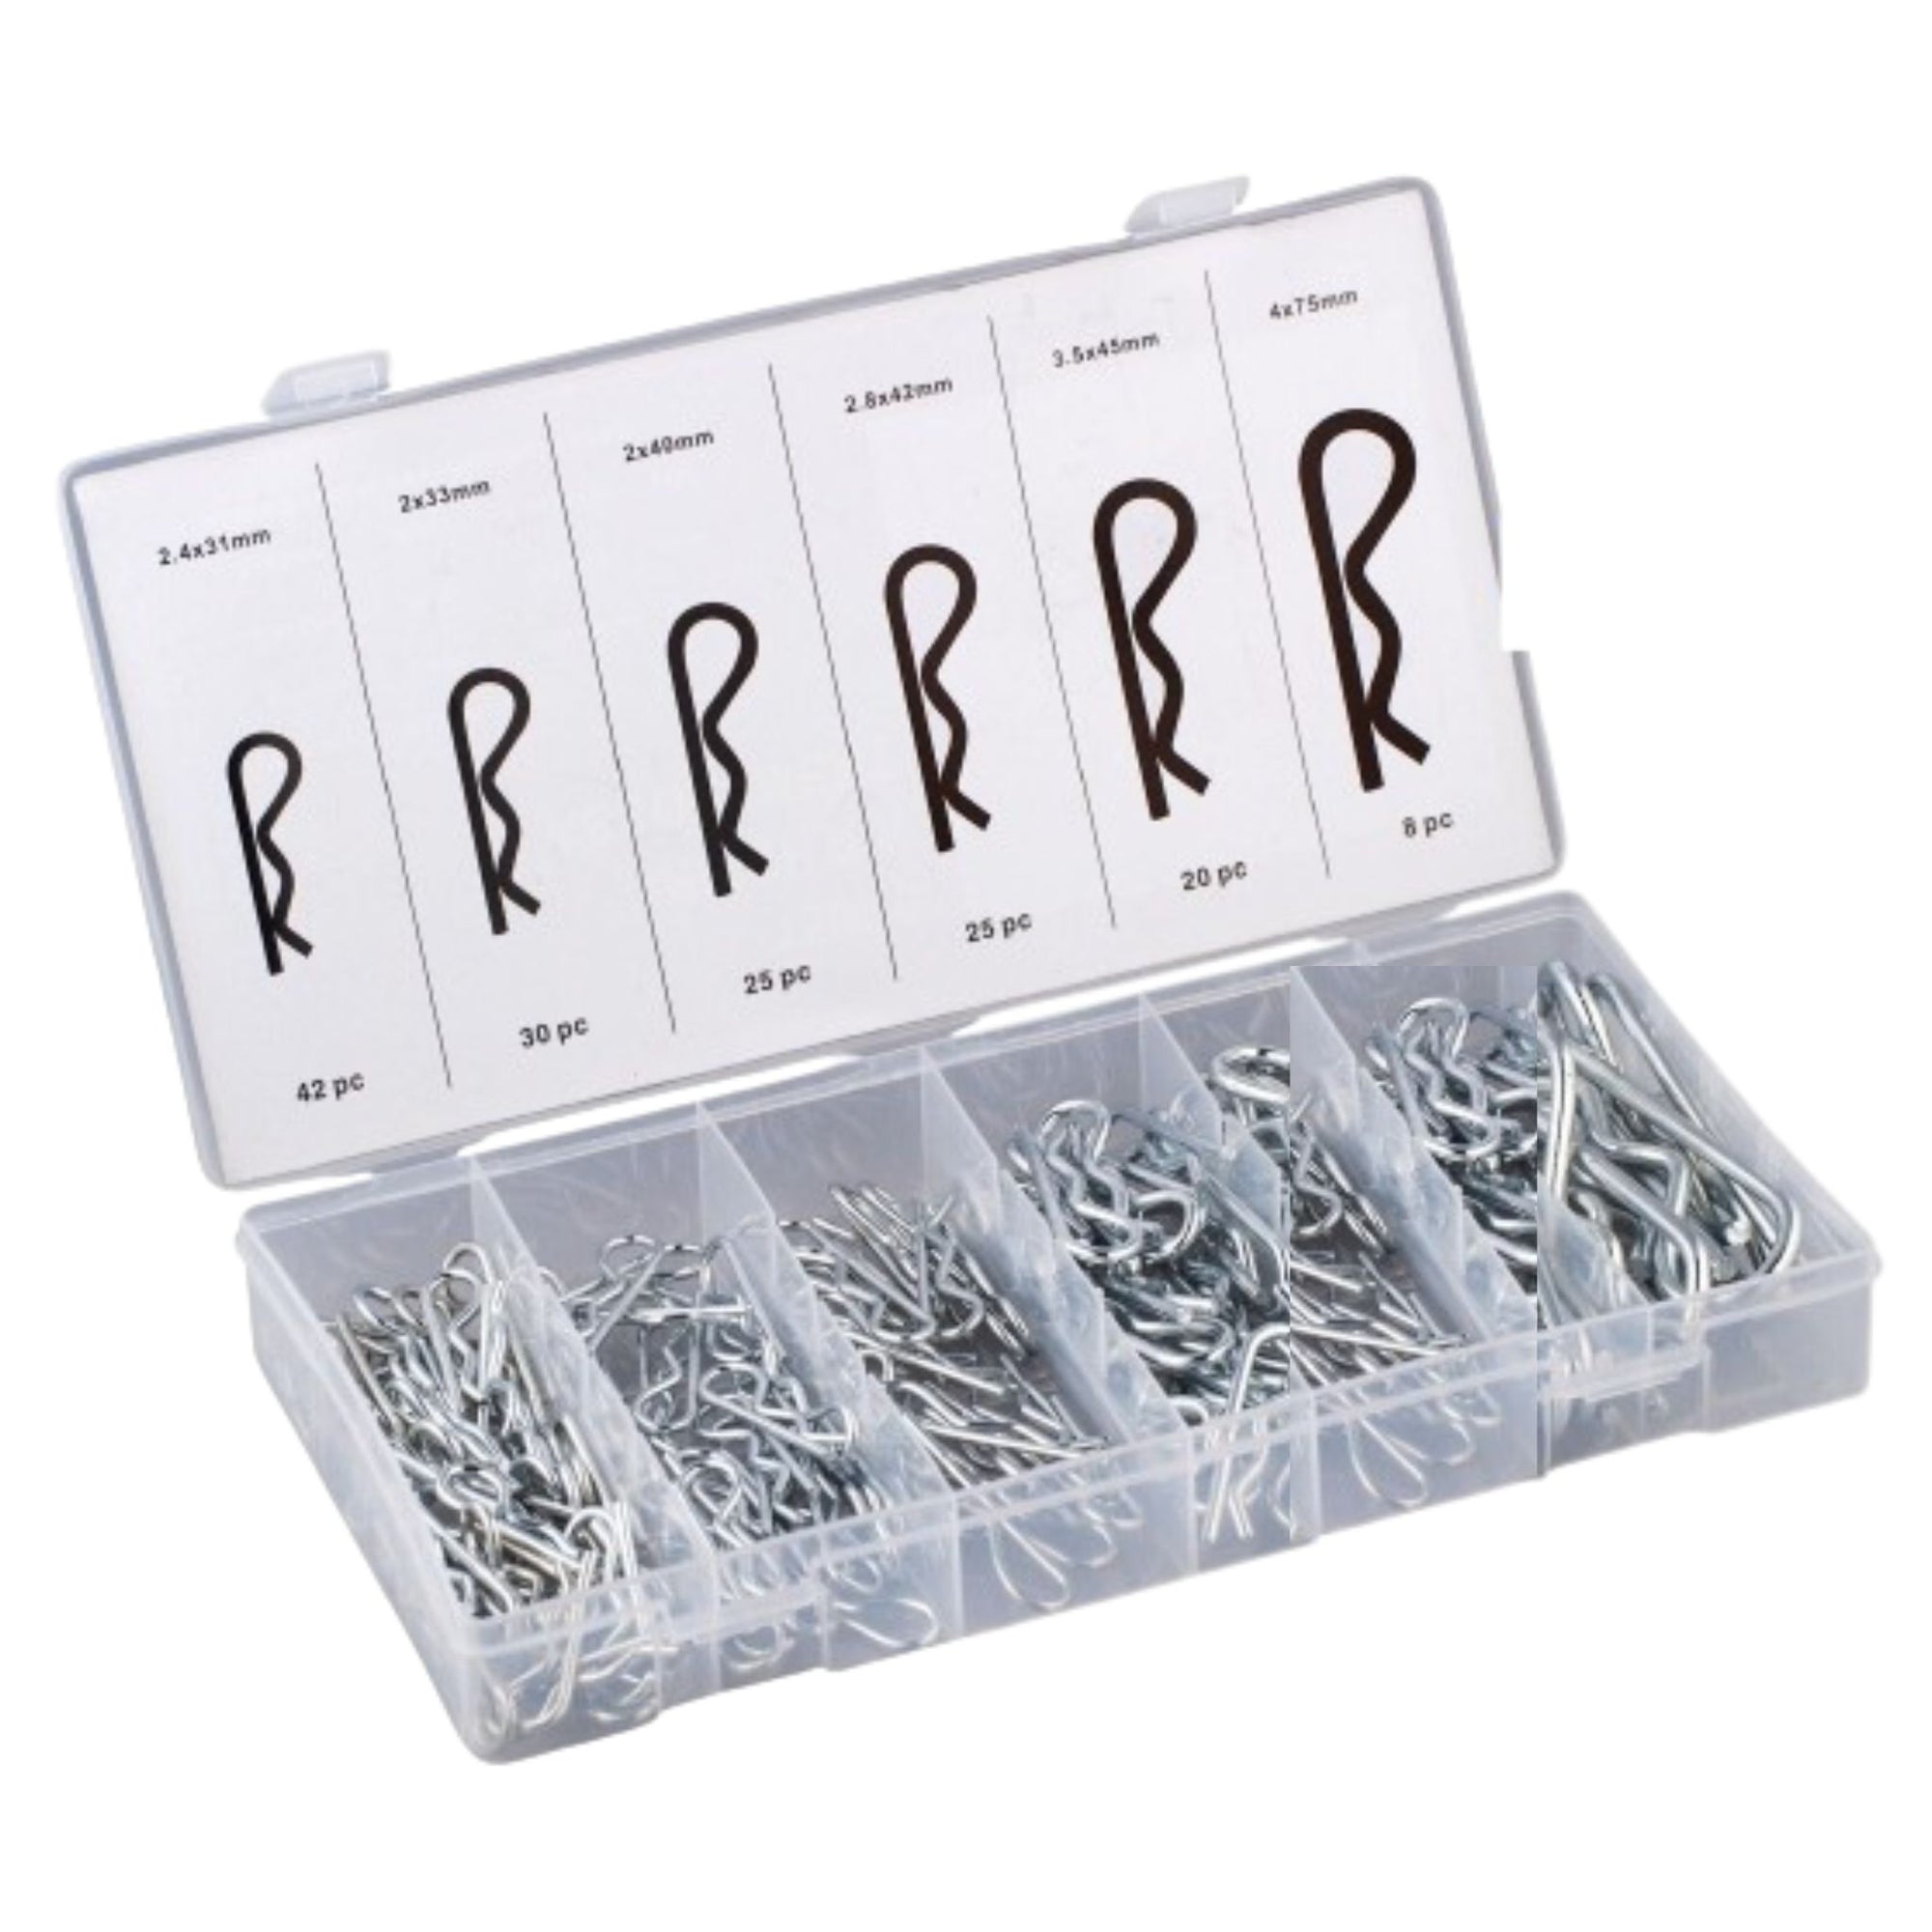 150 Hitch Pin Assortment Kit - South East Clearance Centre